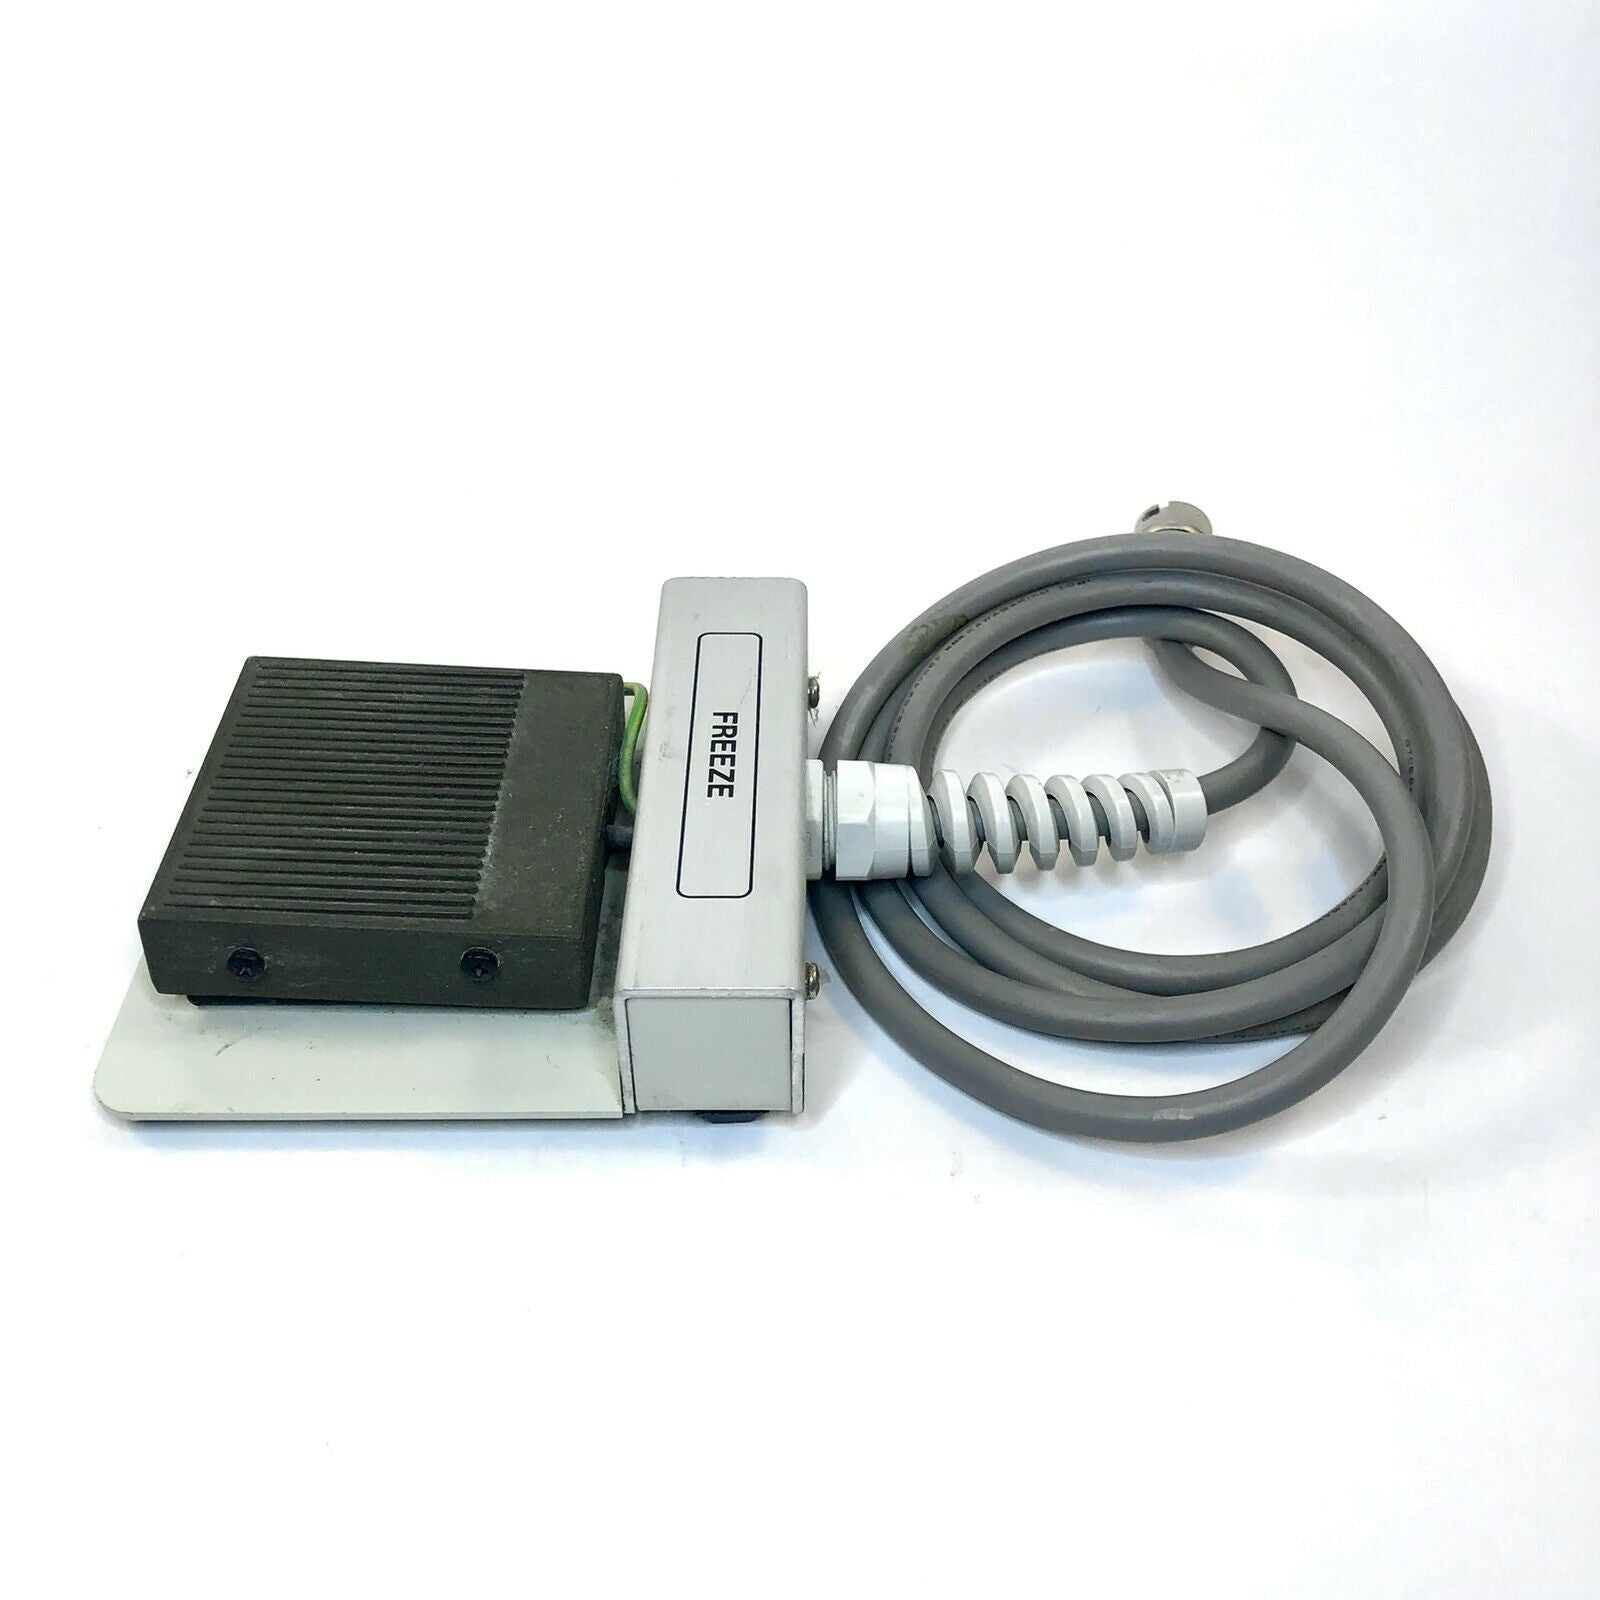 Freeze Foot Switch Pedal for GE Ultrasound Machine - Tested - SHIPS FREE! DIAGNOSTIC ULTRASOUND MACHINES FOR SALE